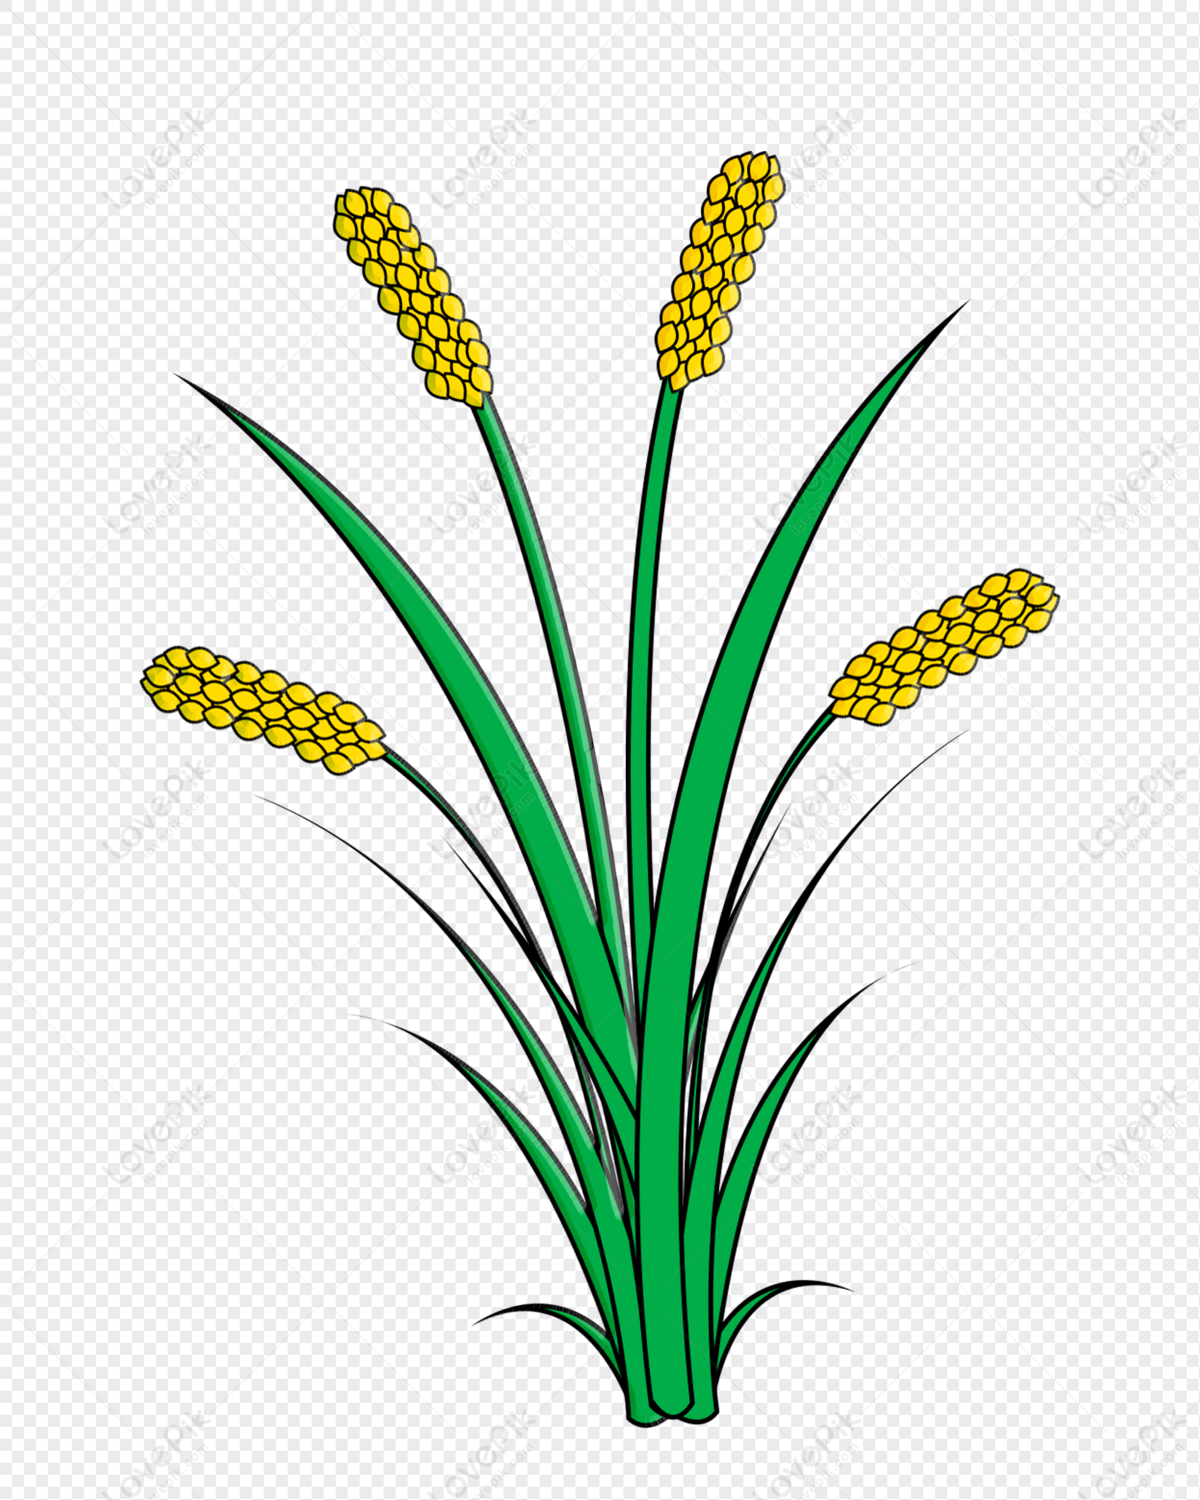 Green Leaf Rice, Art Clipart, Light Yellow, Crop PNG Picture And ...